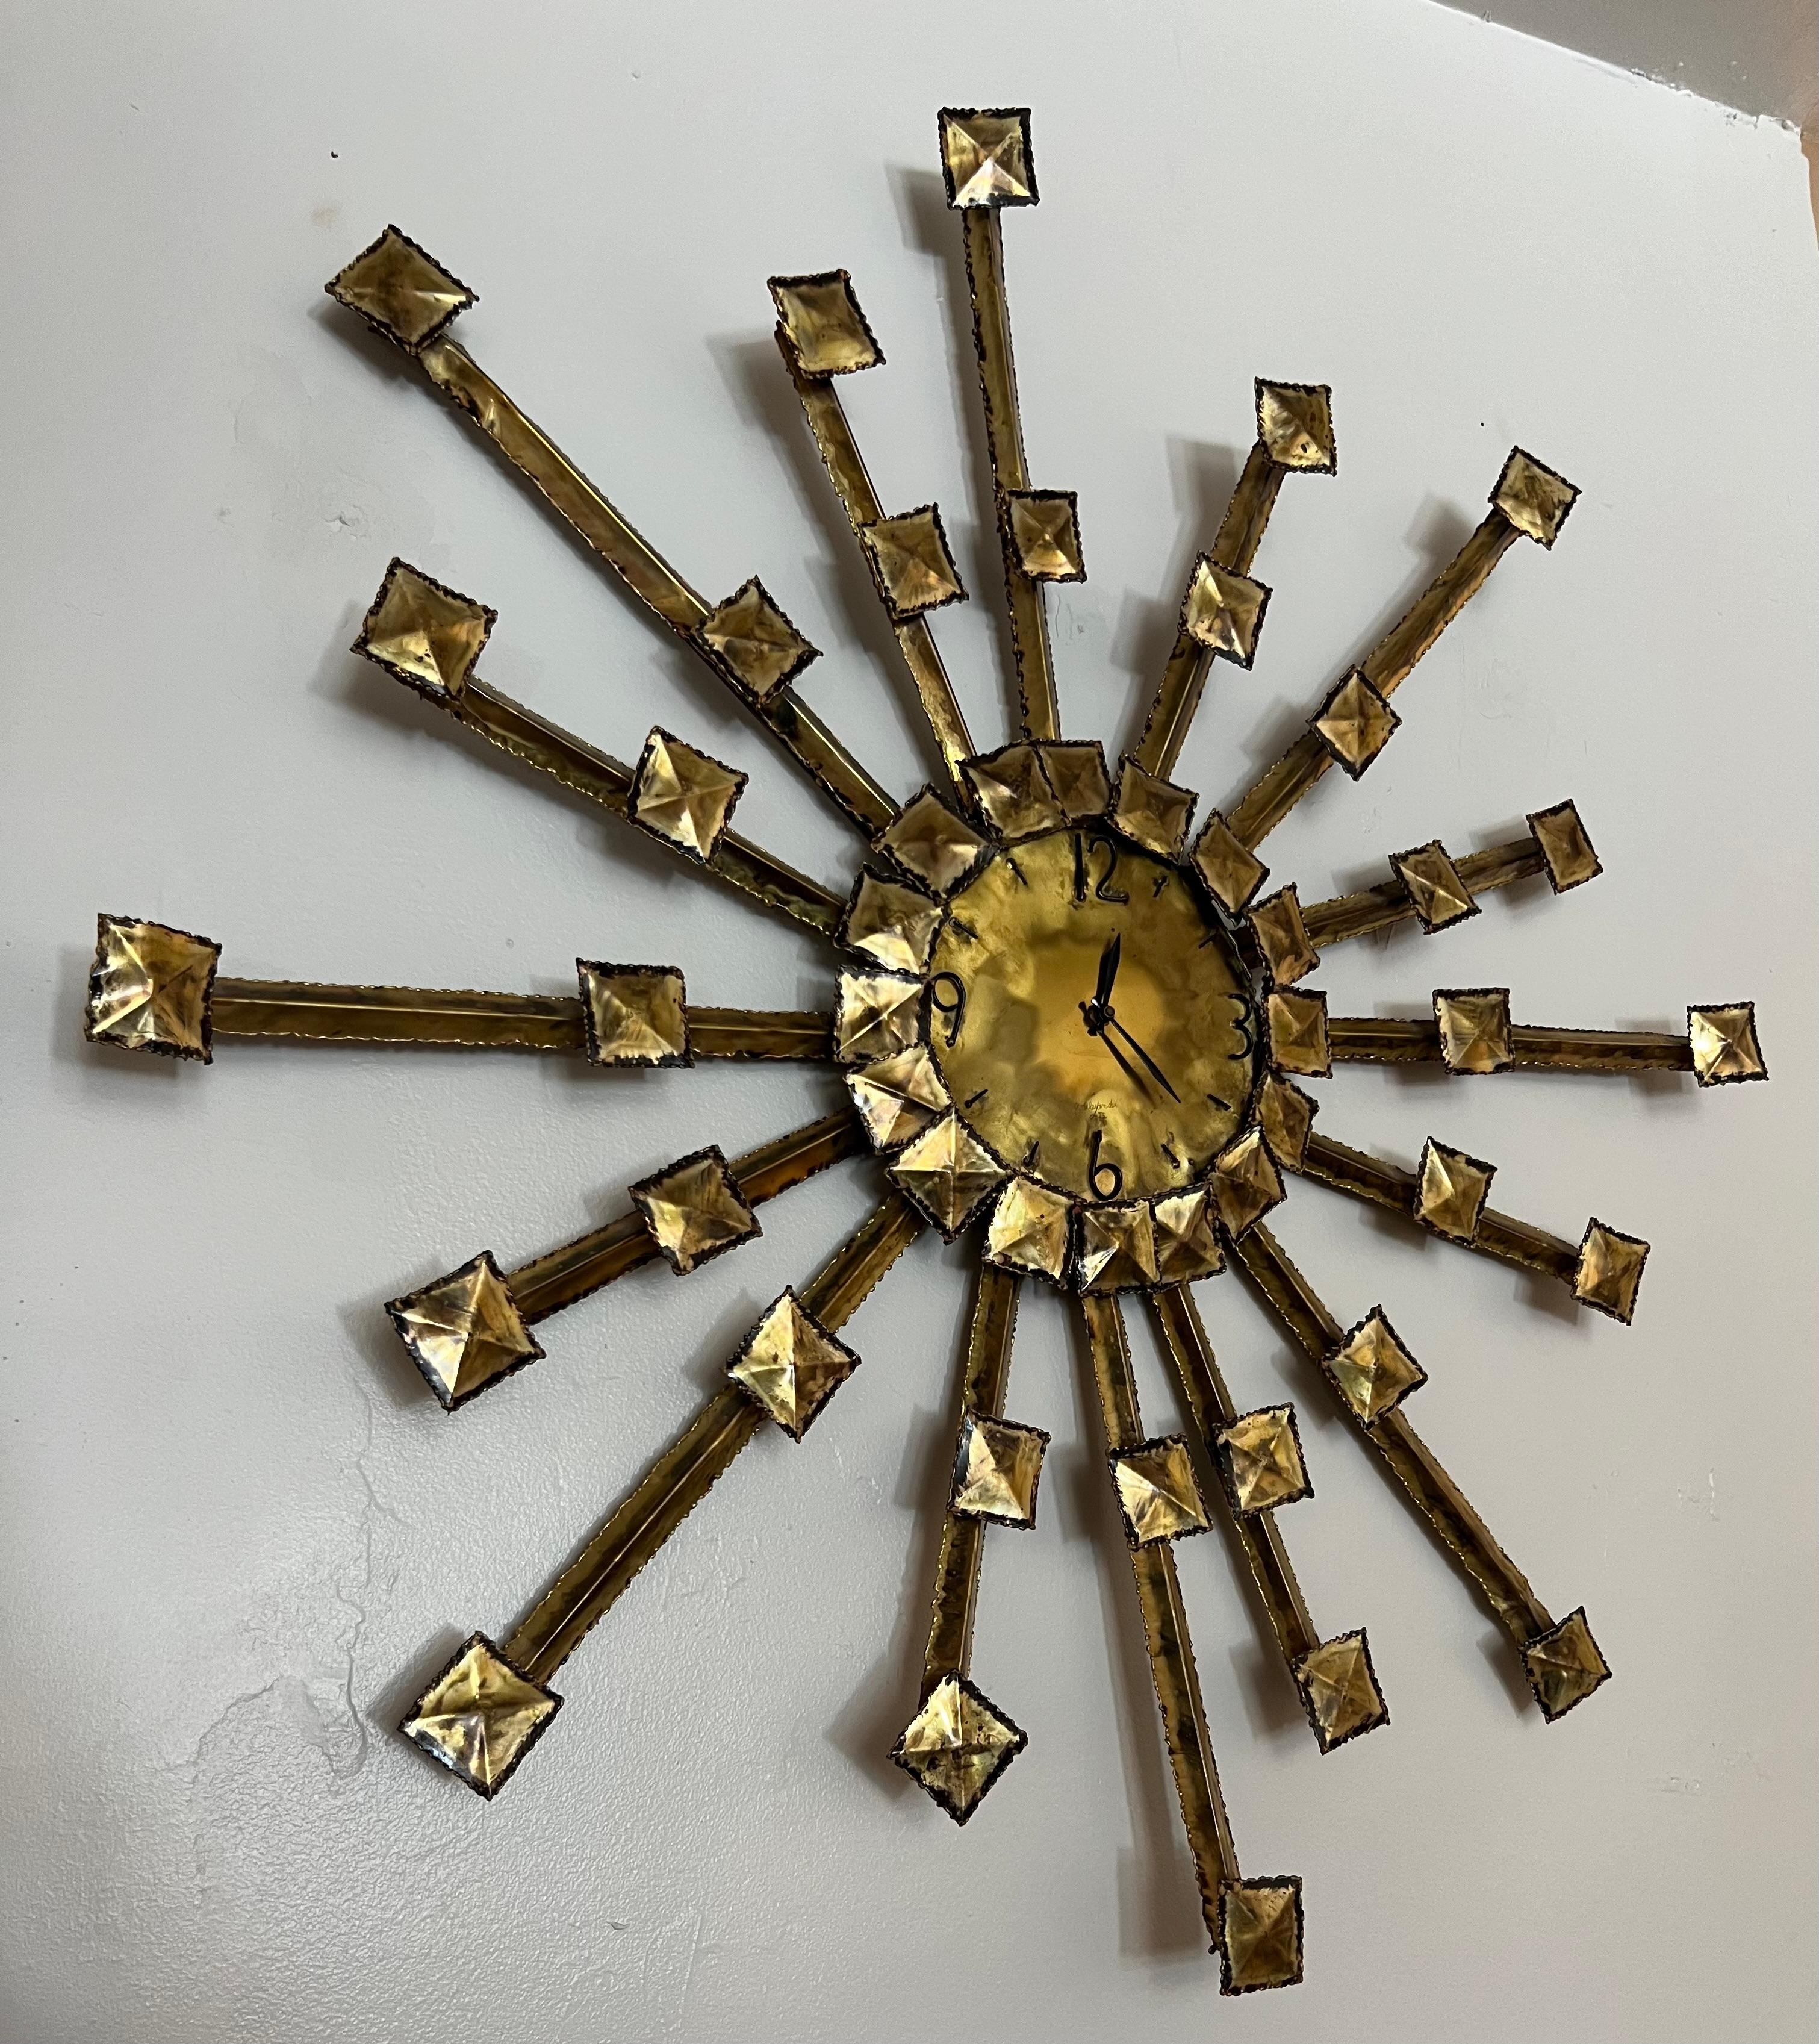 Brutalist torch cut wall clock. Signed J. Alexander 75. Keeps time however the movement is a bit slow and over time falls behind slightly. Beautiful patinated mixed metal componentes throughout. Please refer to photos (additional photos available